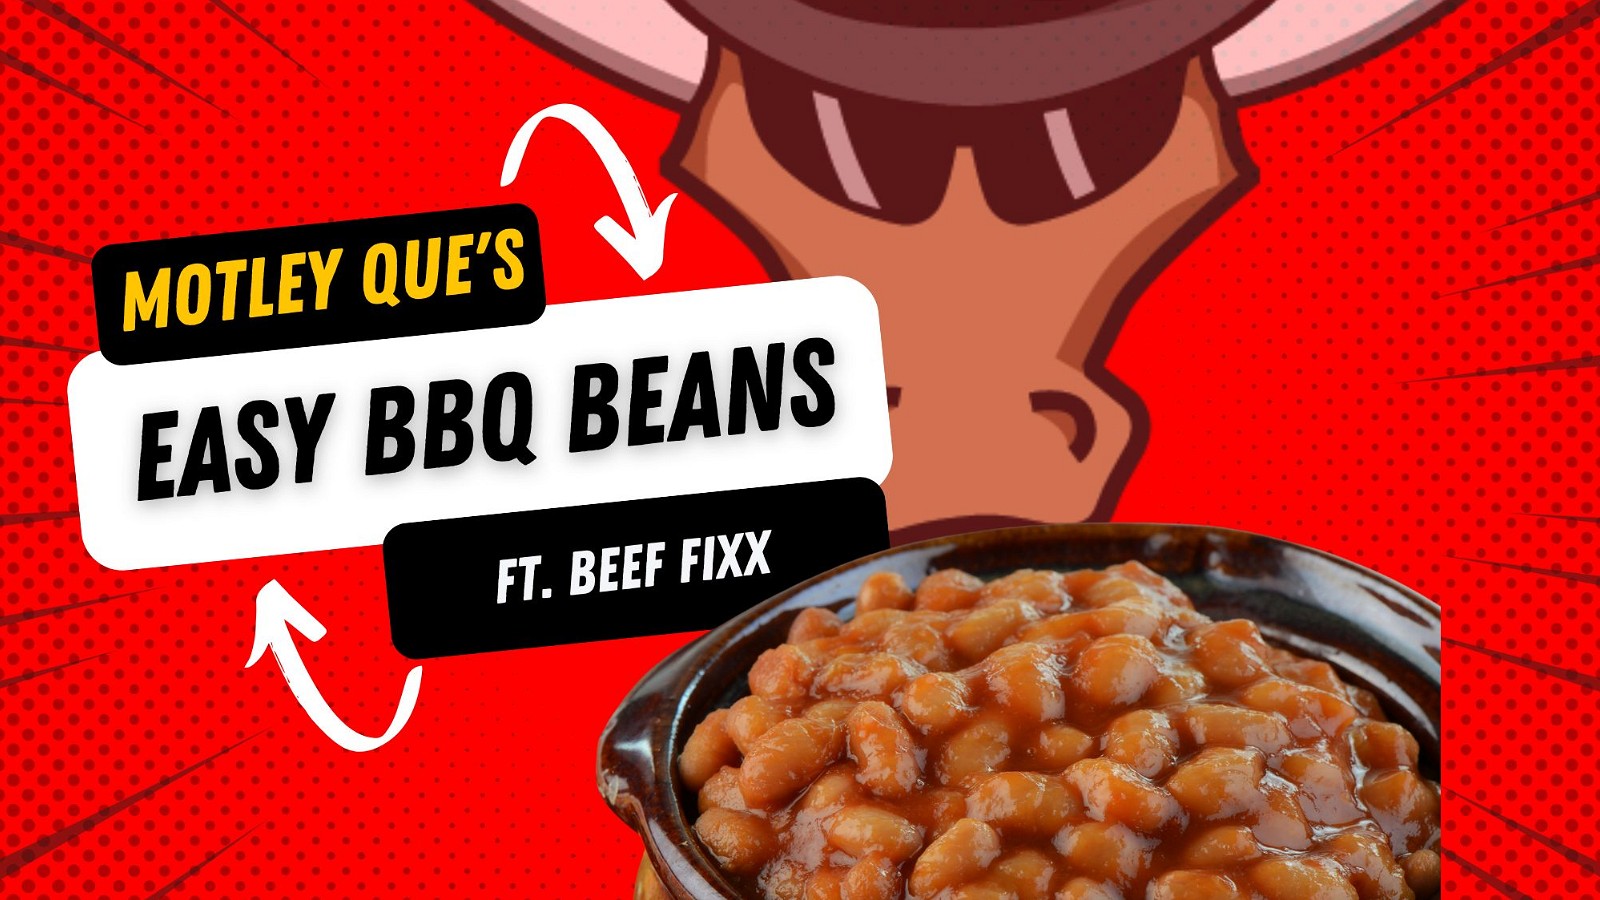 Image of Easy BBQ Beans